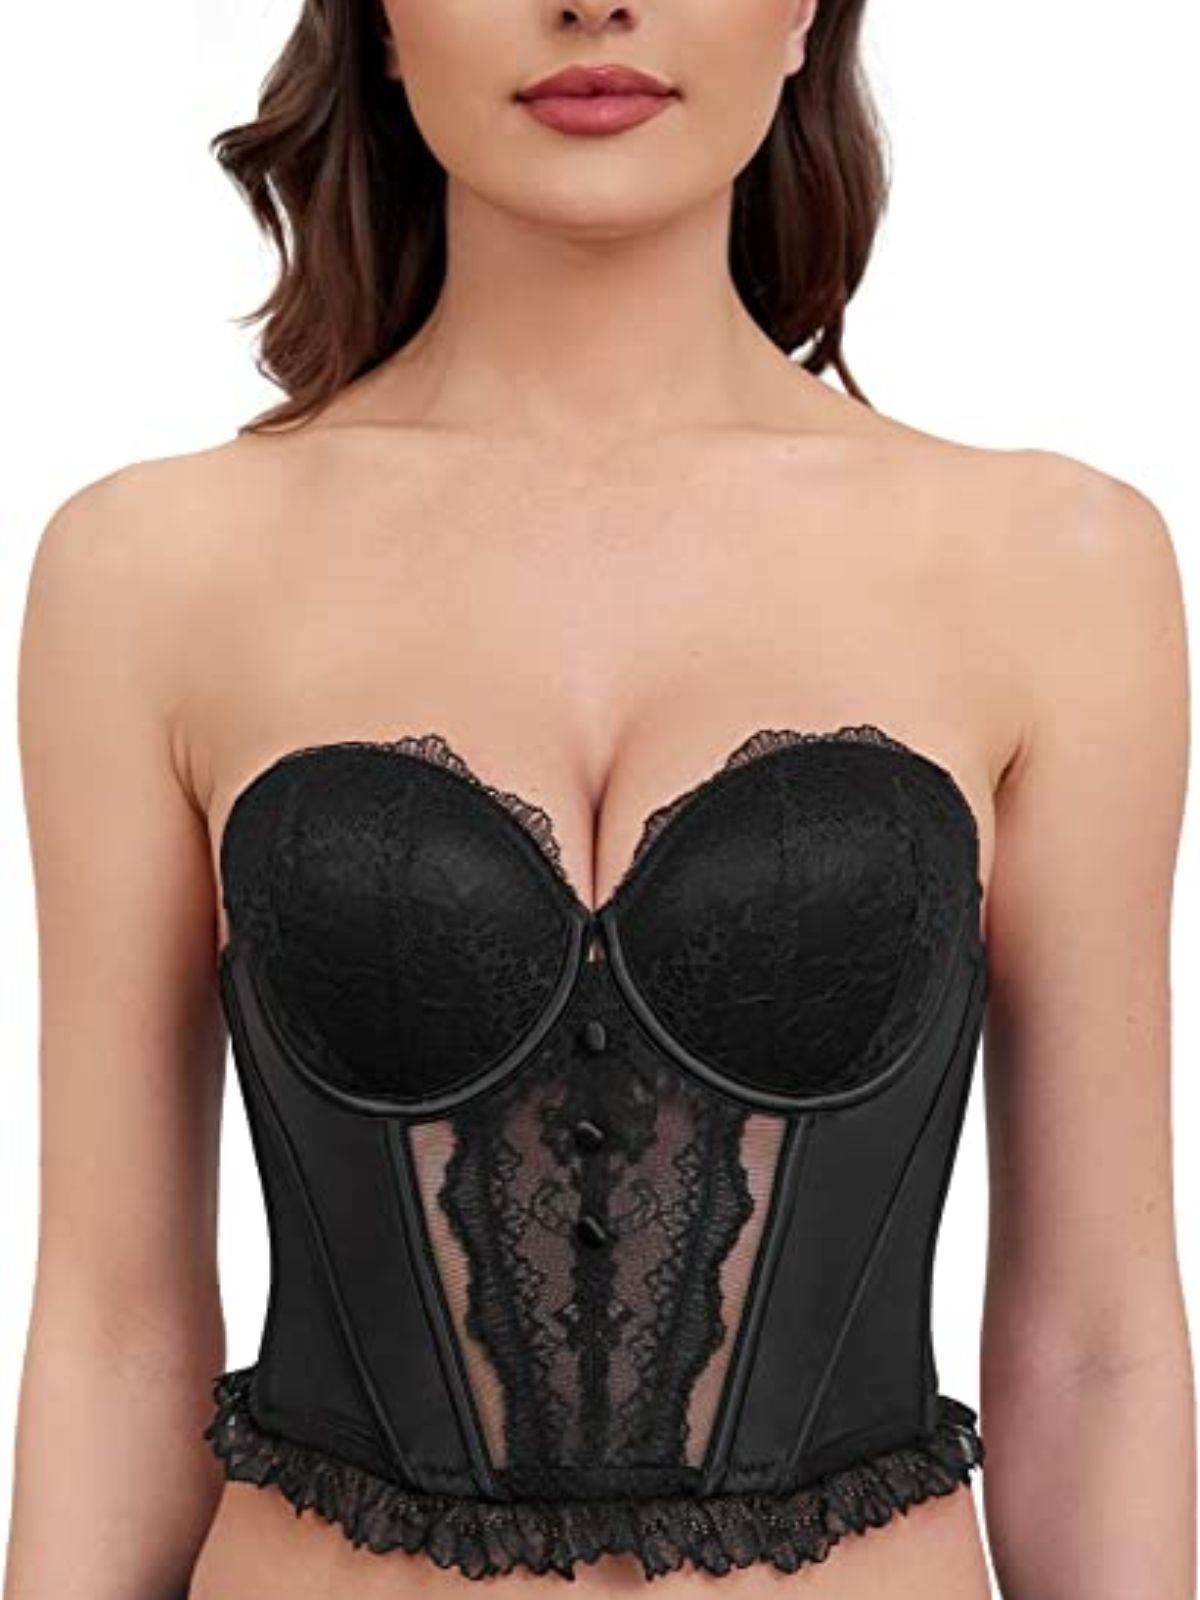  Other Stories bustier bra with lace and mesh embroidery in off-white